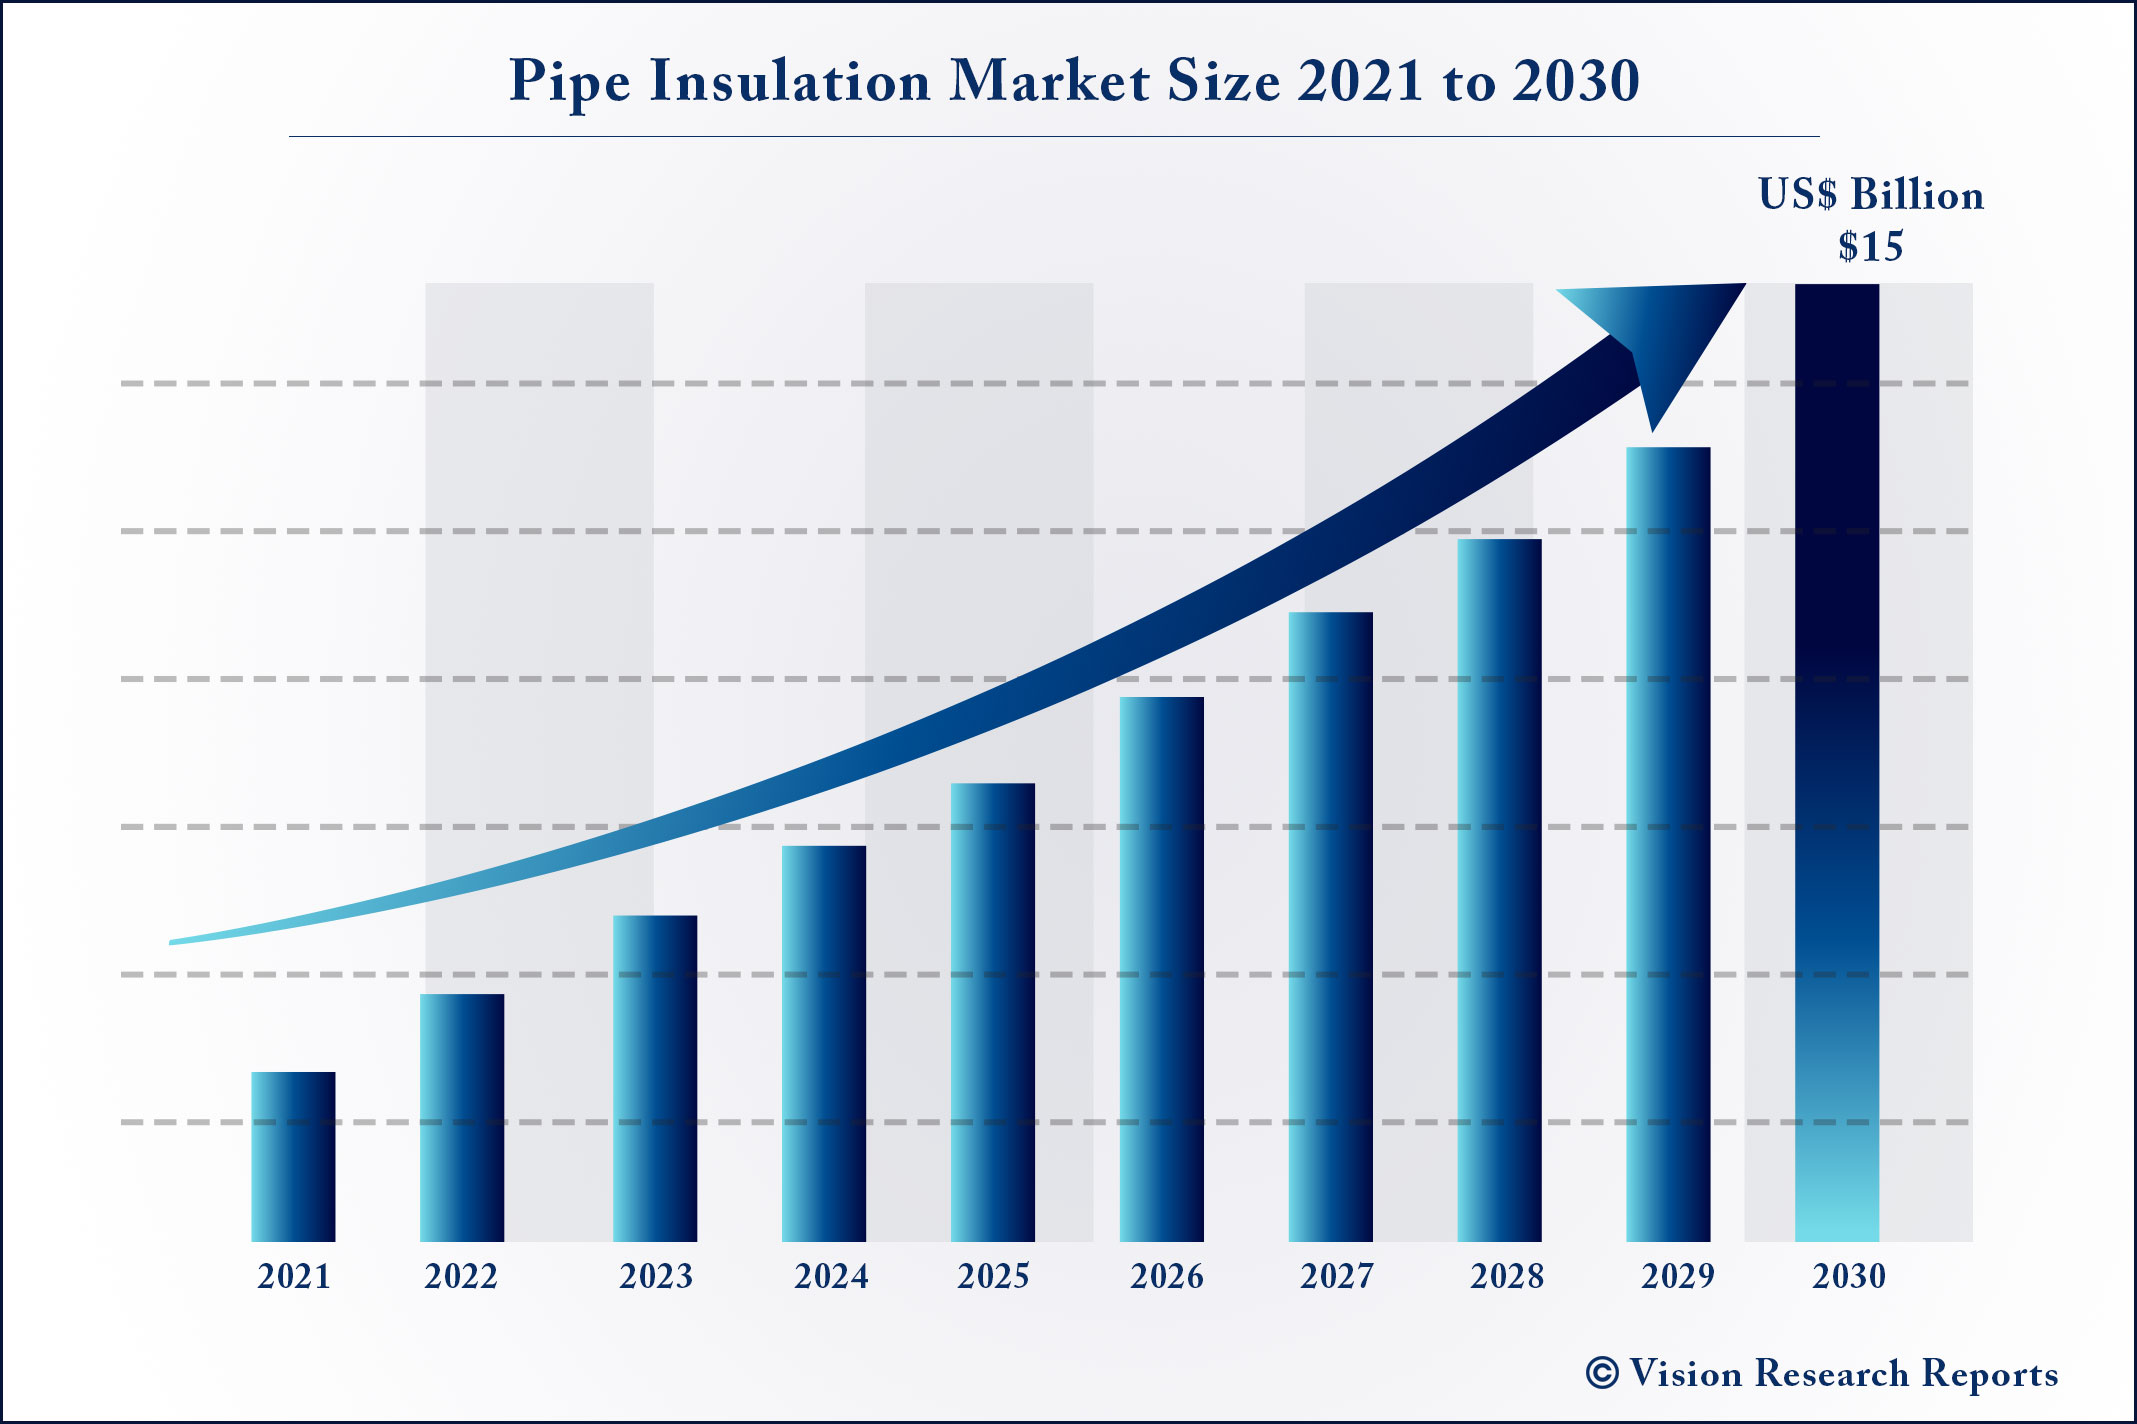 Pipe Insulation Market Size 2021 to 2030